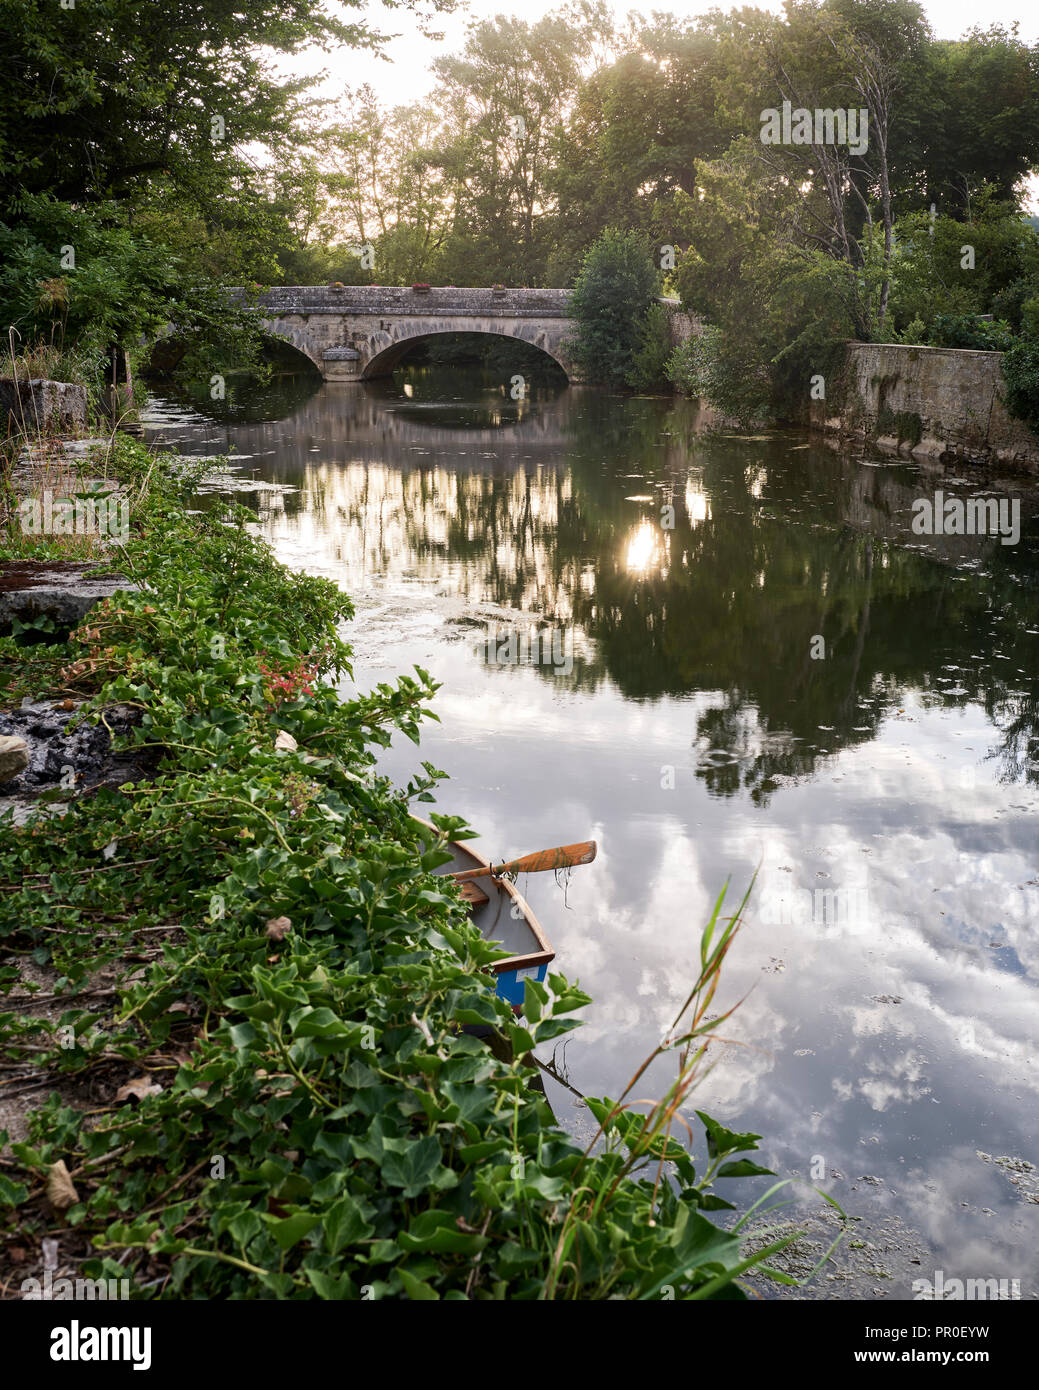 Rowing boat on river with arched stone bridge Stock Photo